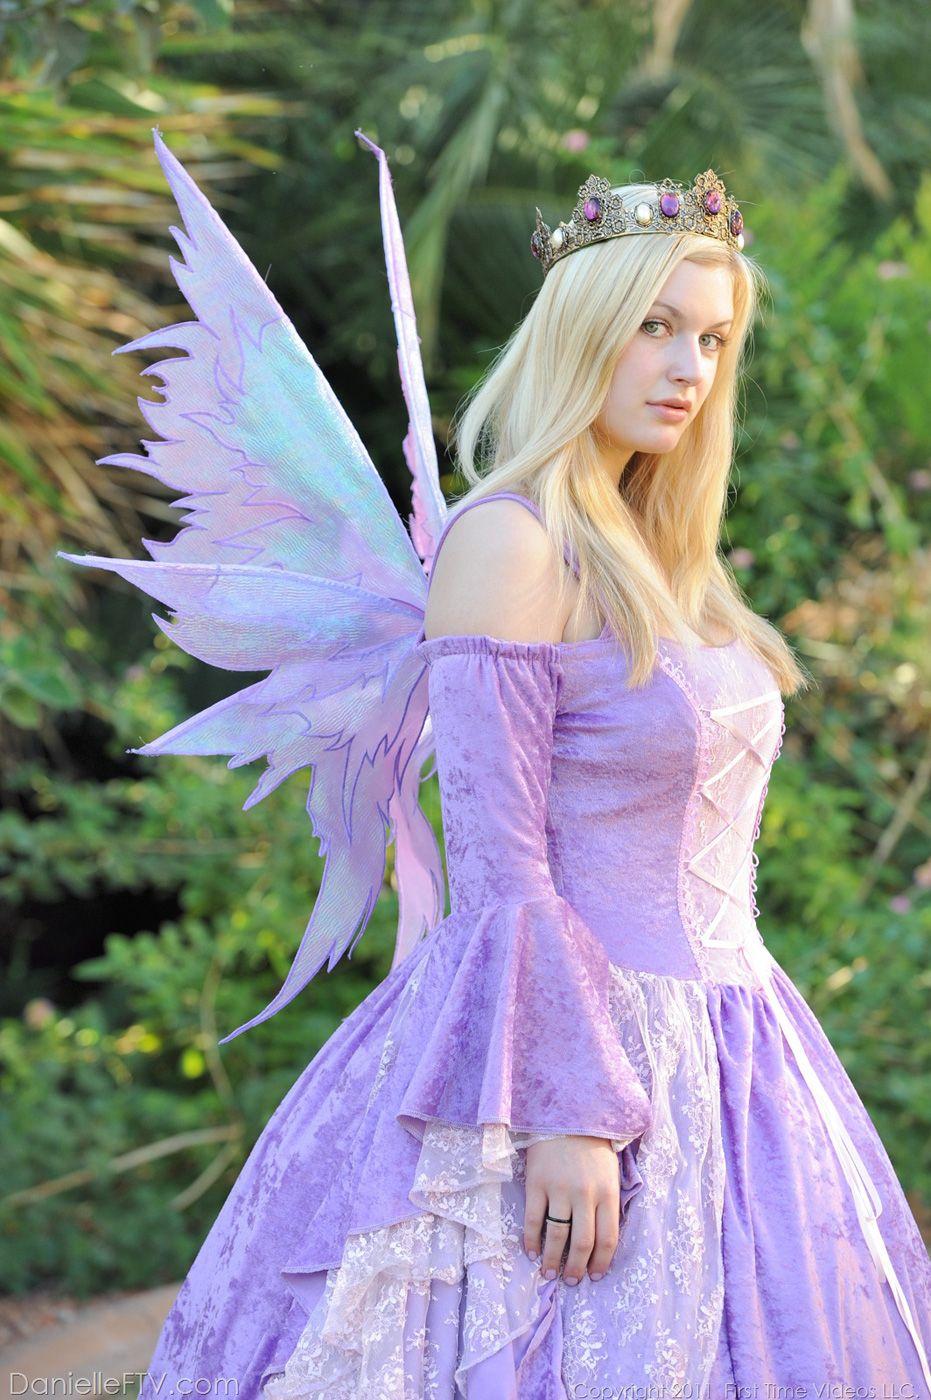 Pictures Of Danielle FTV Dressed As Your Fantasy Fairy